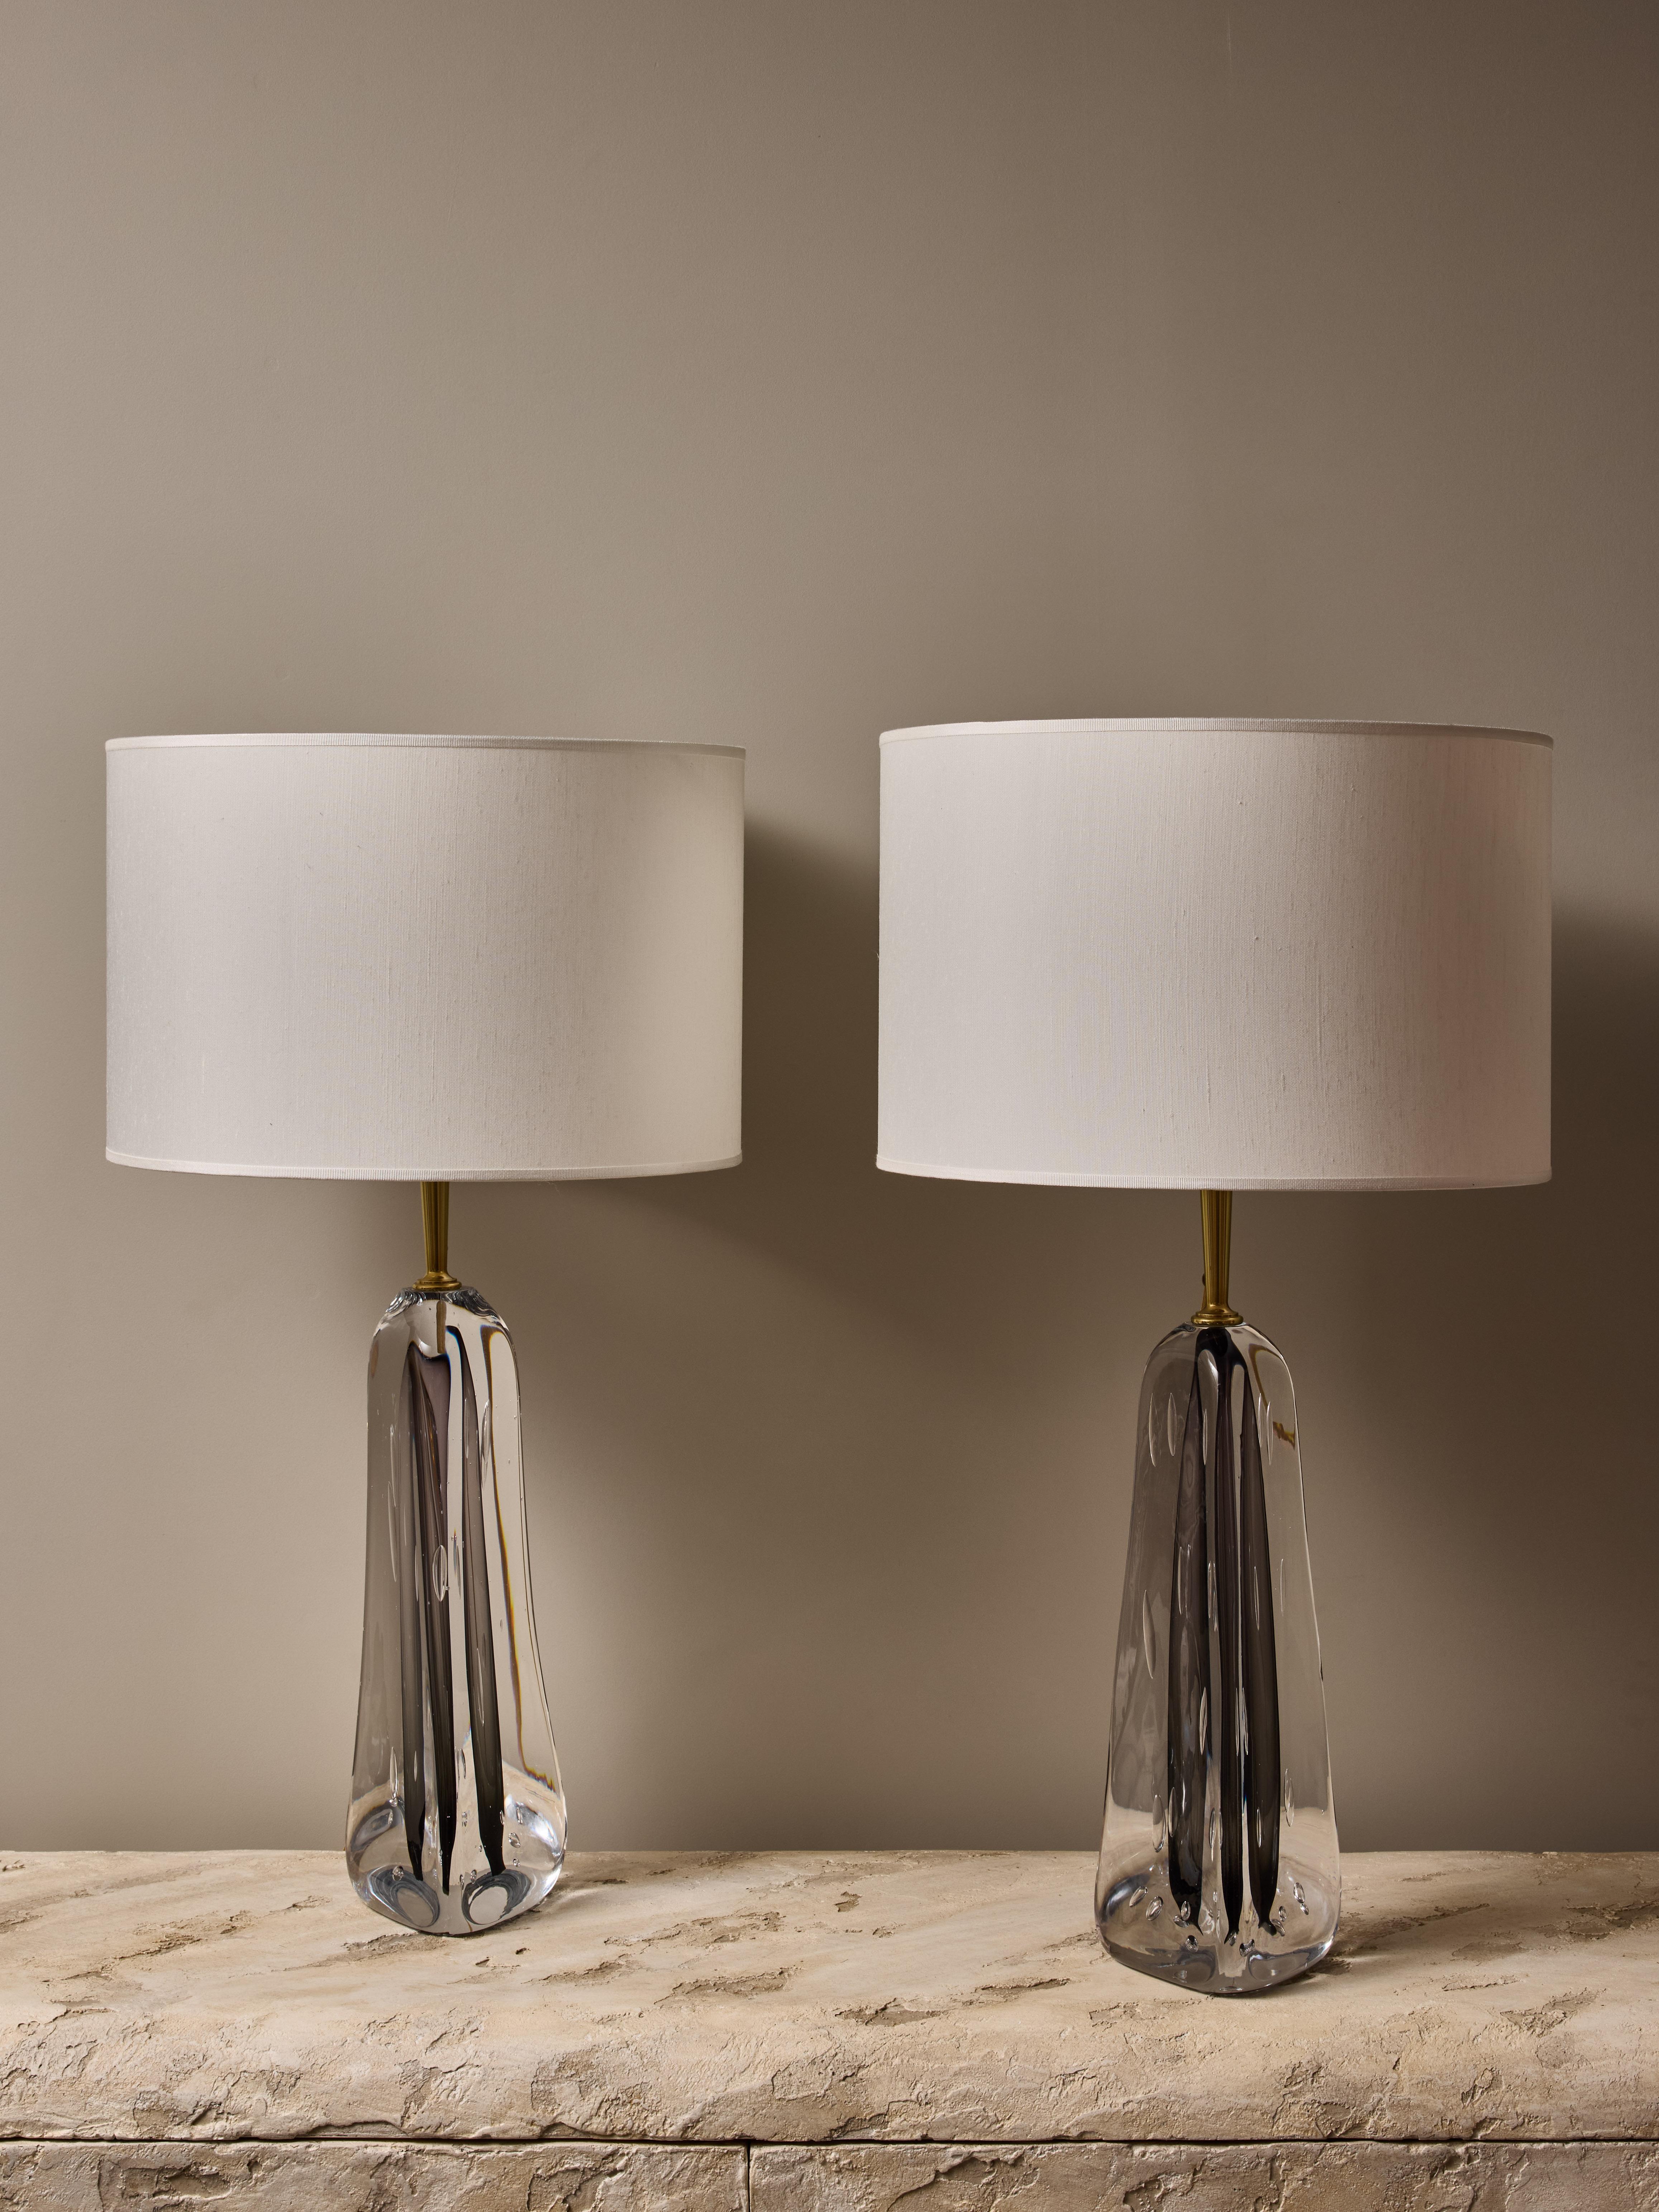 Pair of table lamps made by Esperia, each made of a triangular foot in blown clear glass, with a streak of dark grey in the center. Some air bubbles are visible in the glass, which is topped with a polished brass stem holding two sources of light